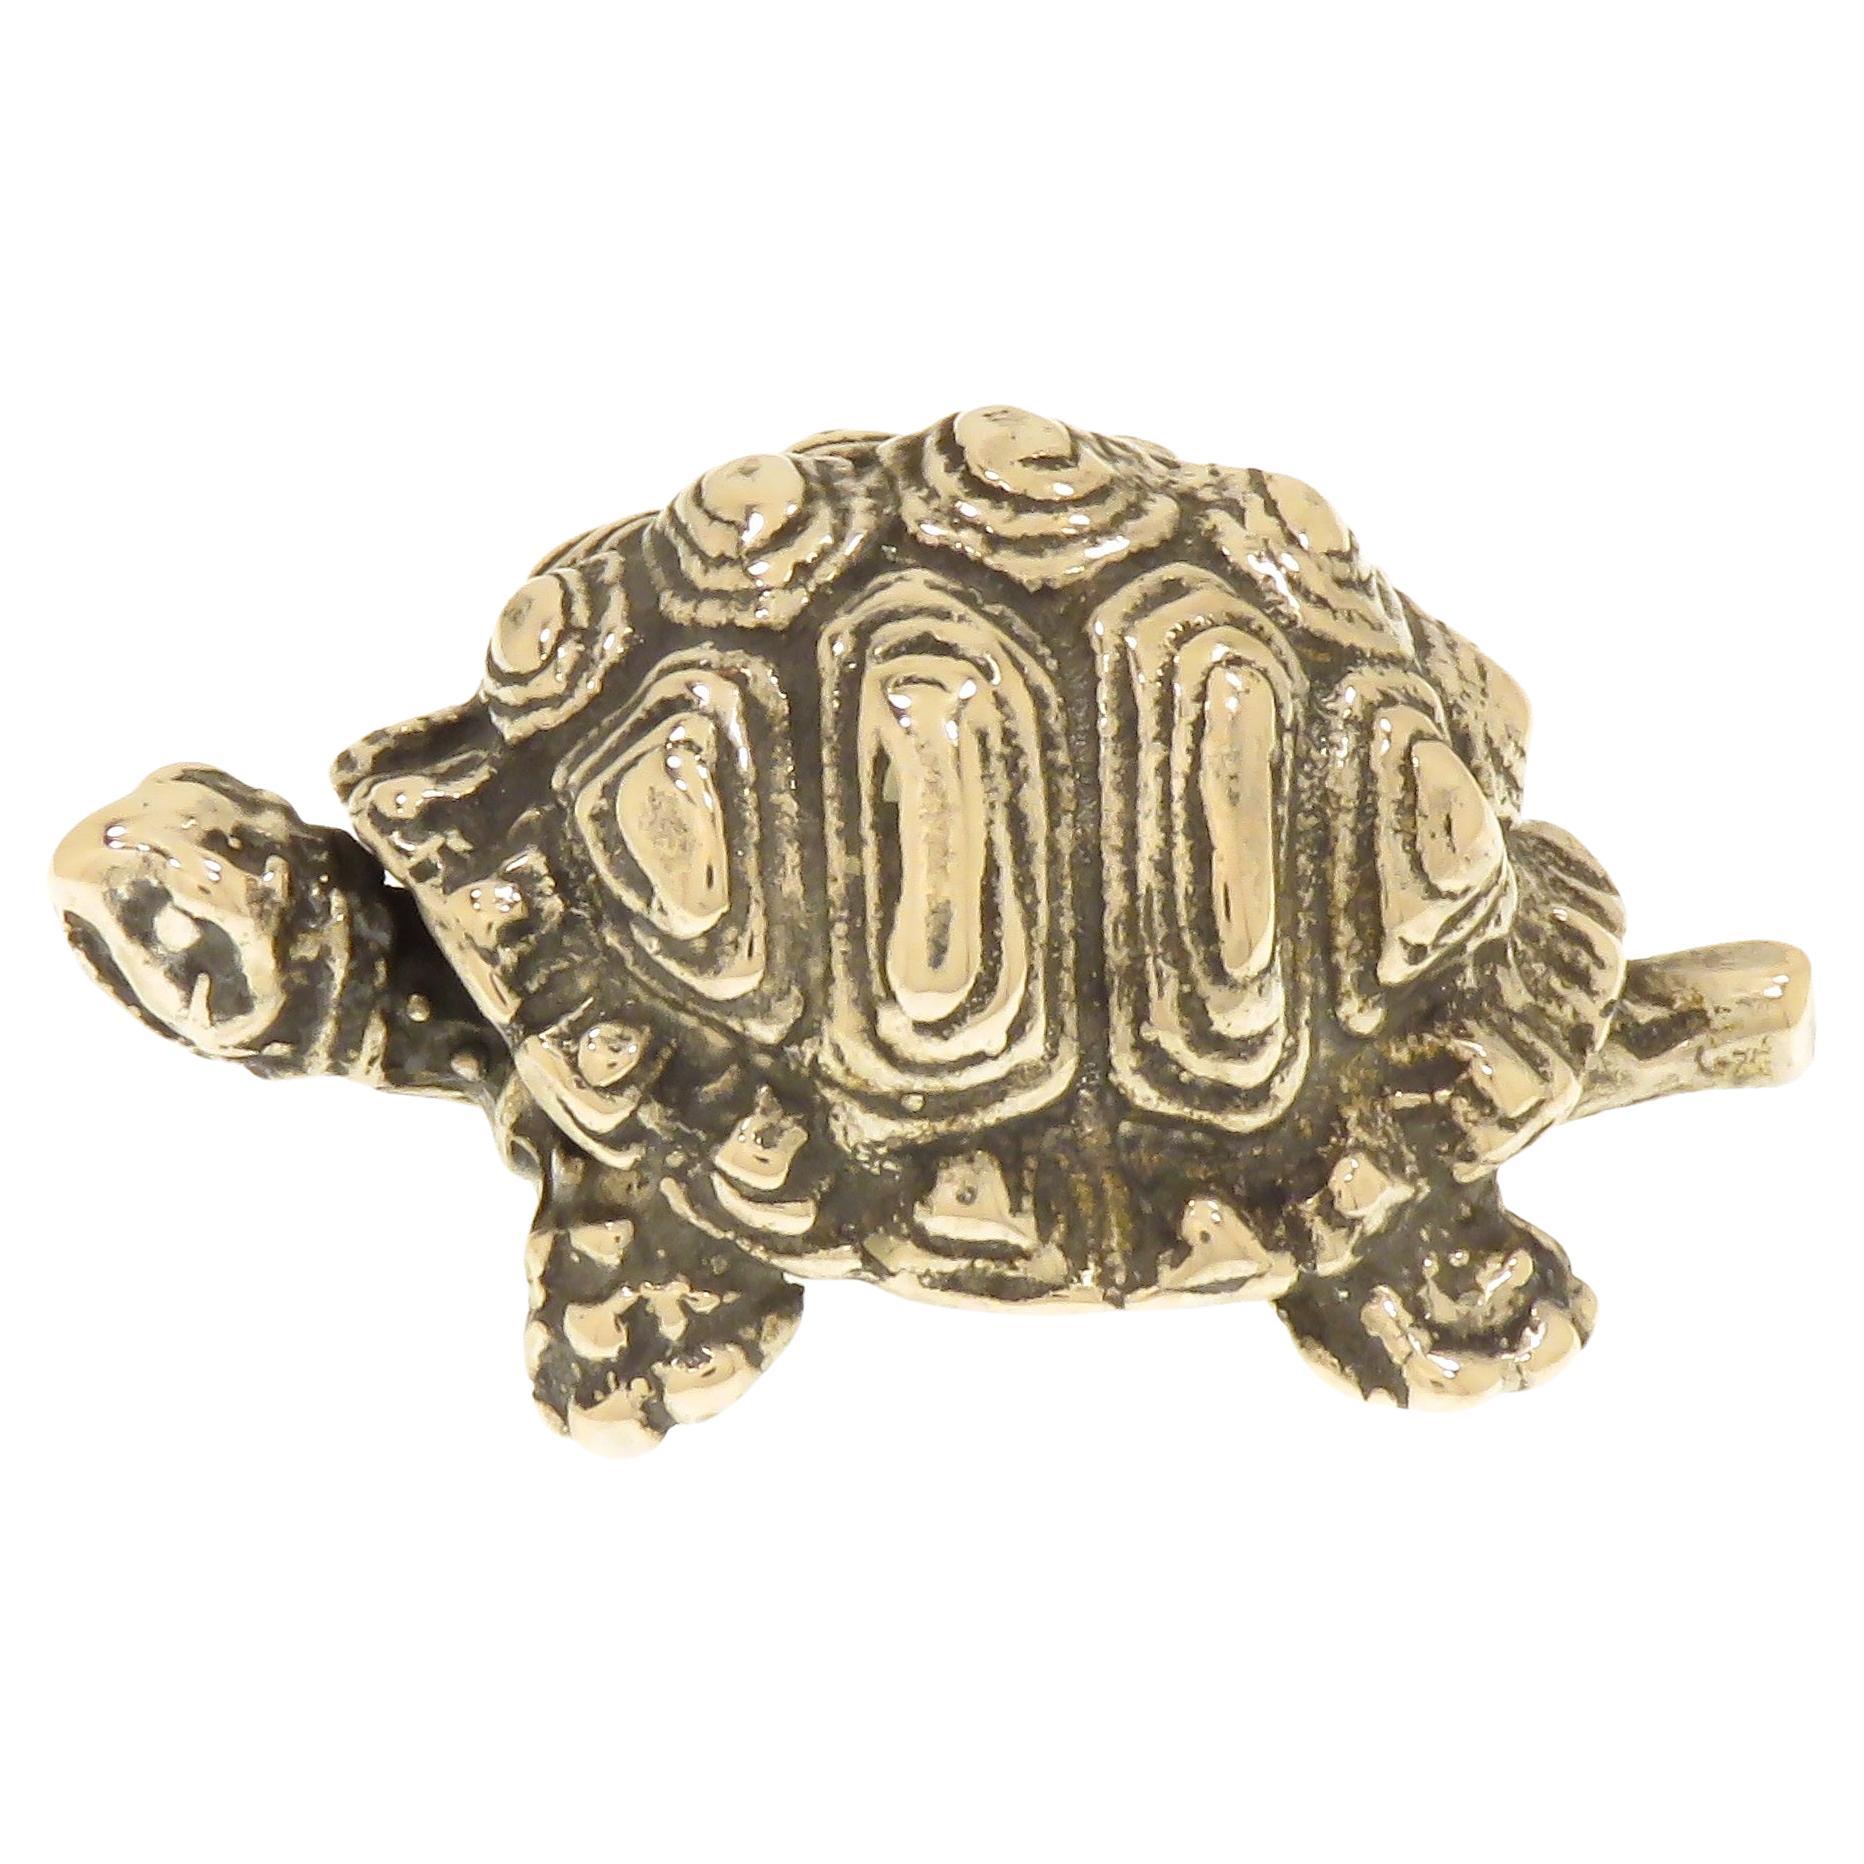 Solid Silver Turtle Figurine Vintage 1970s Made in Italy For Sale